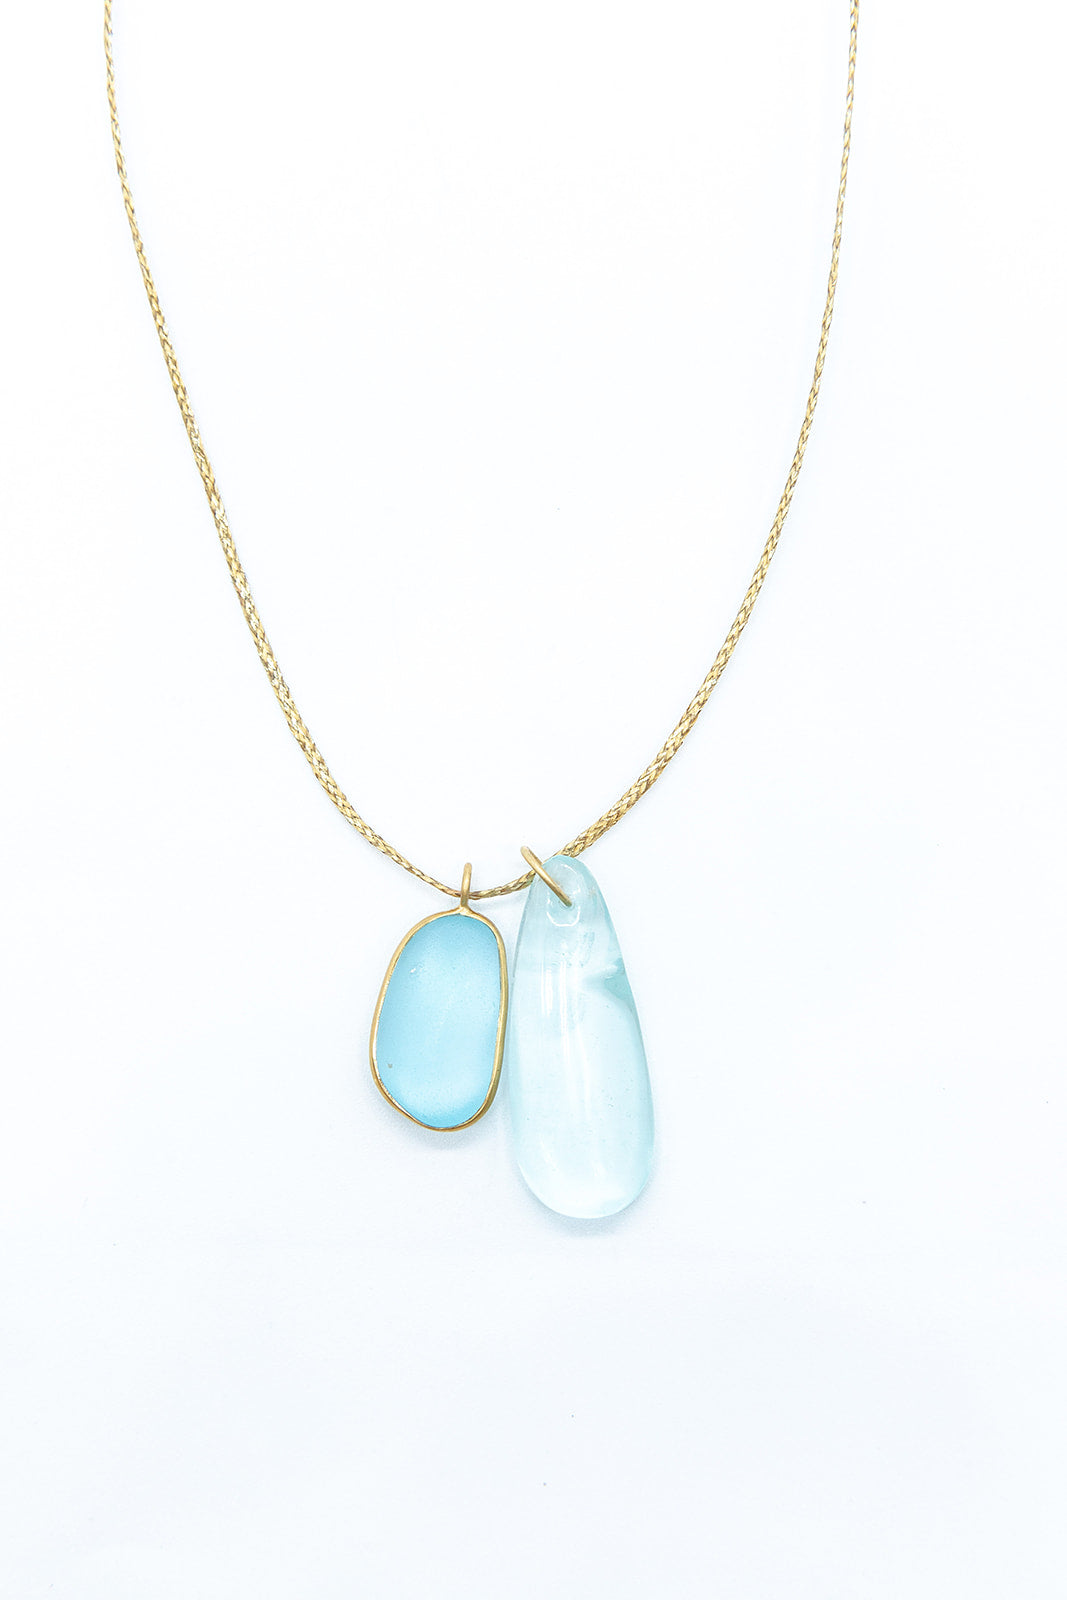 Pippa-Small-18K-yellow-gold-blue-topaz-collette-pendant-on-cord-amarees